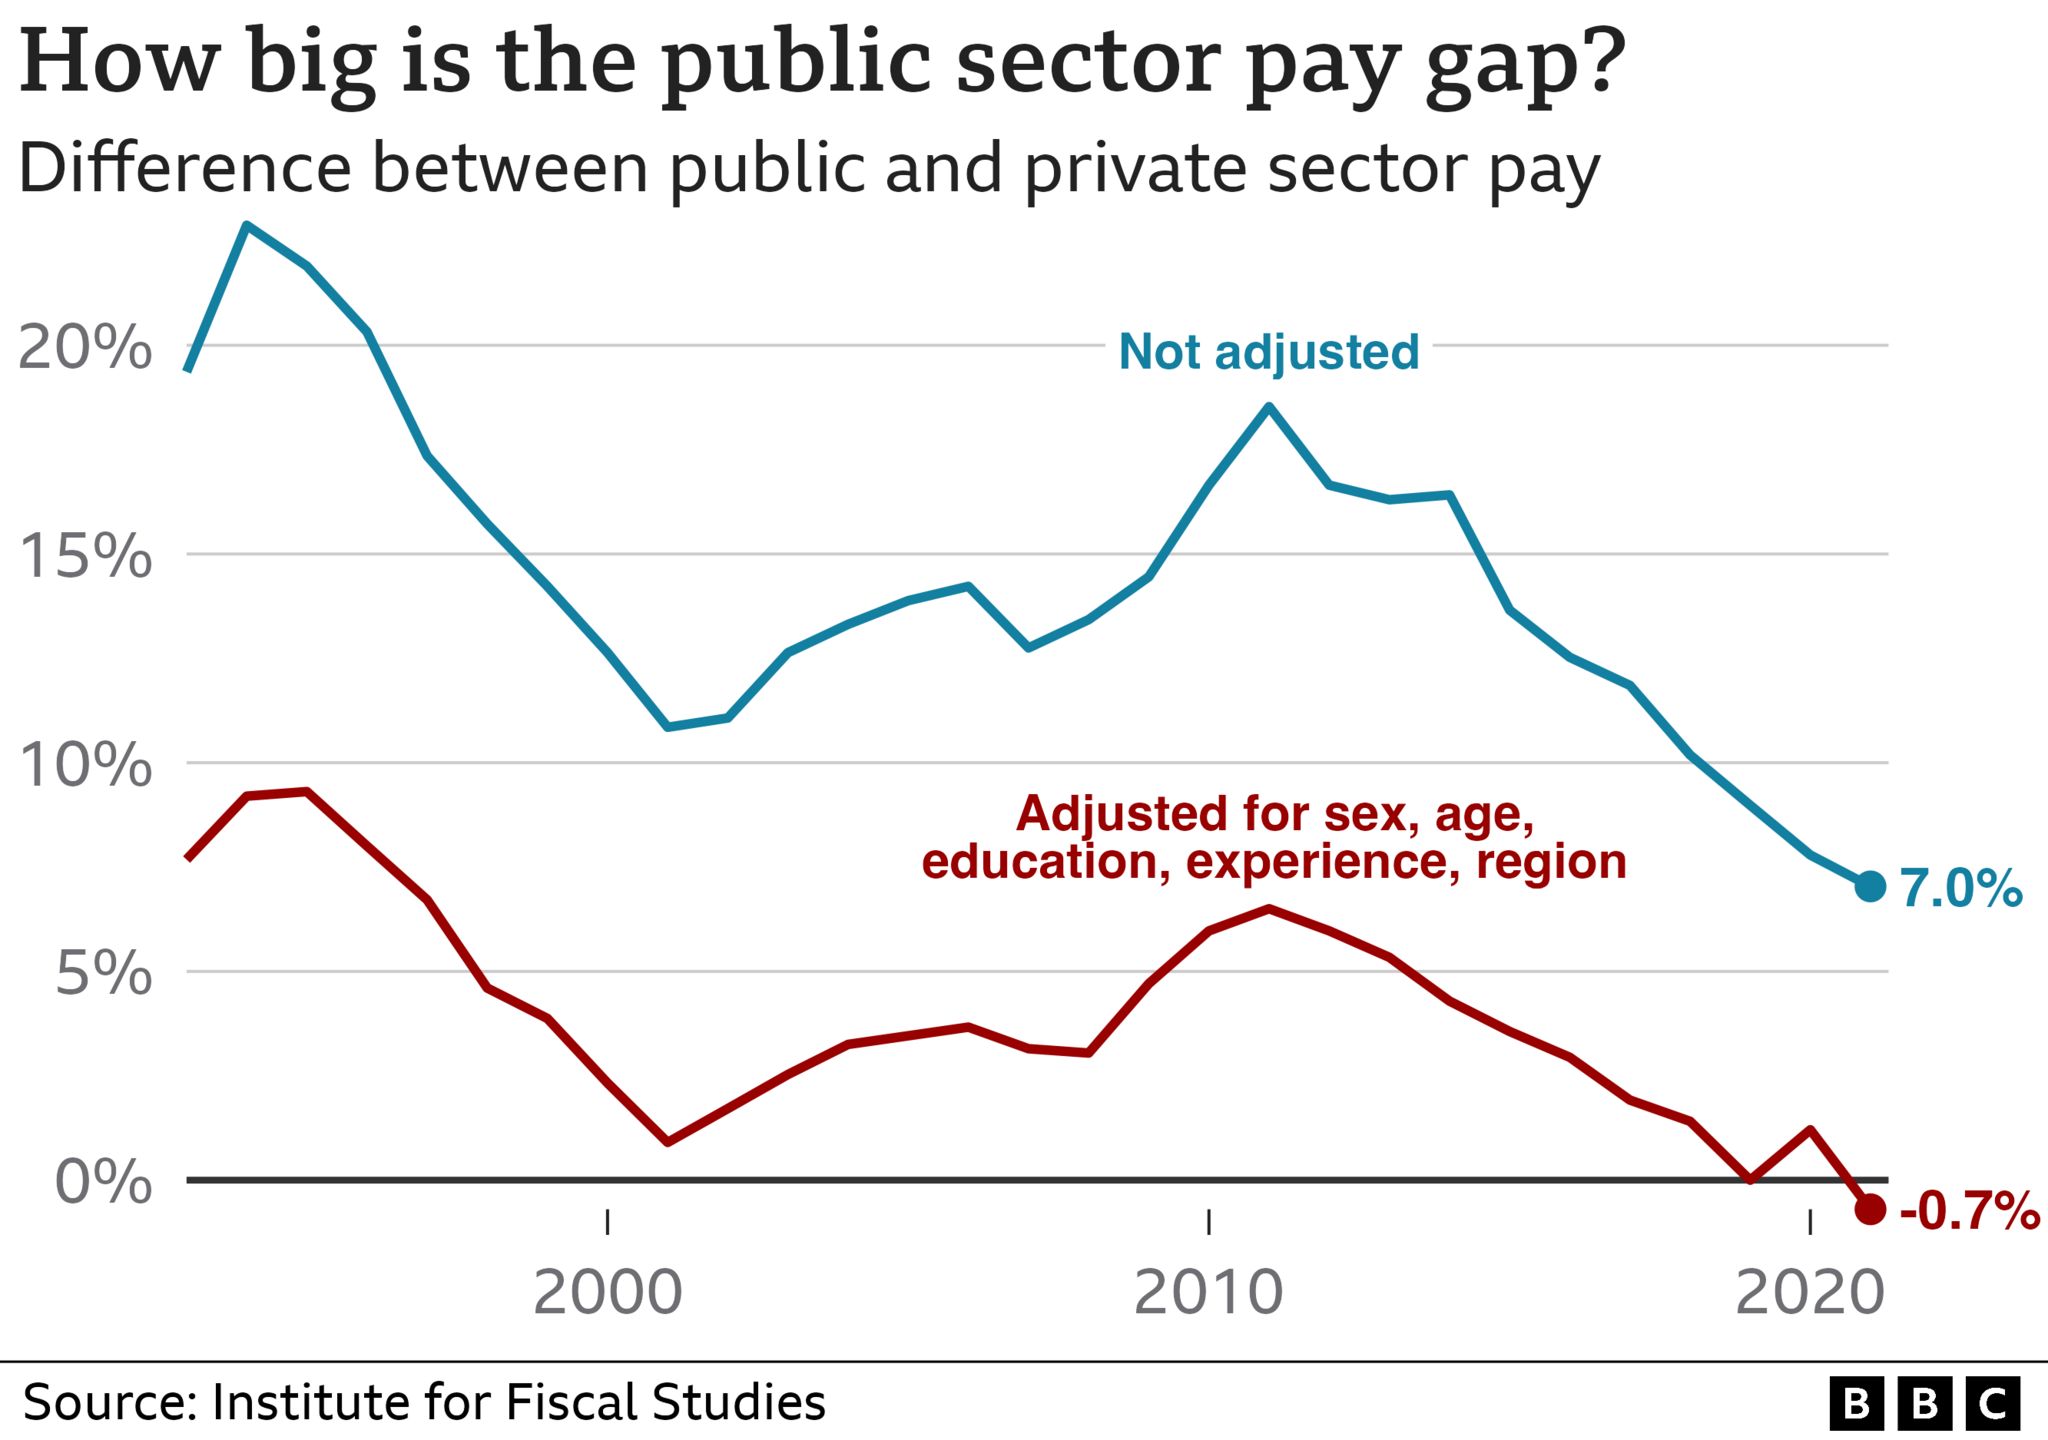 Chart showing gap between public and private sector pay after adjusting for workers' characteristics